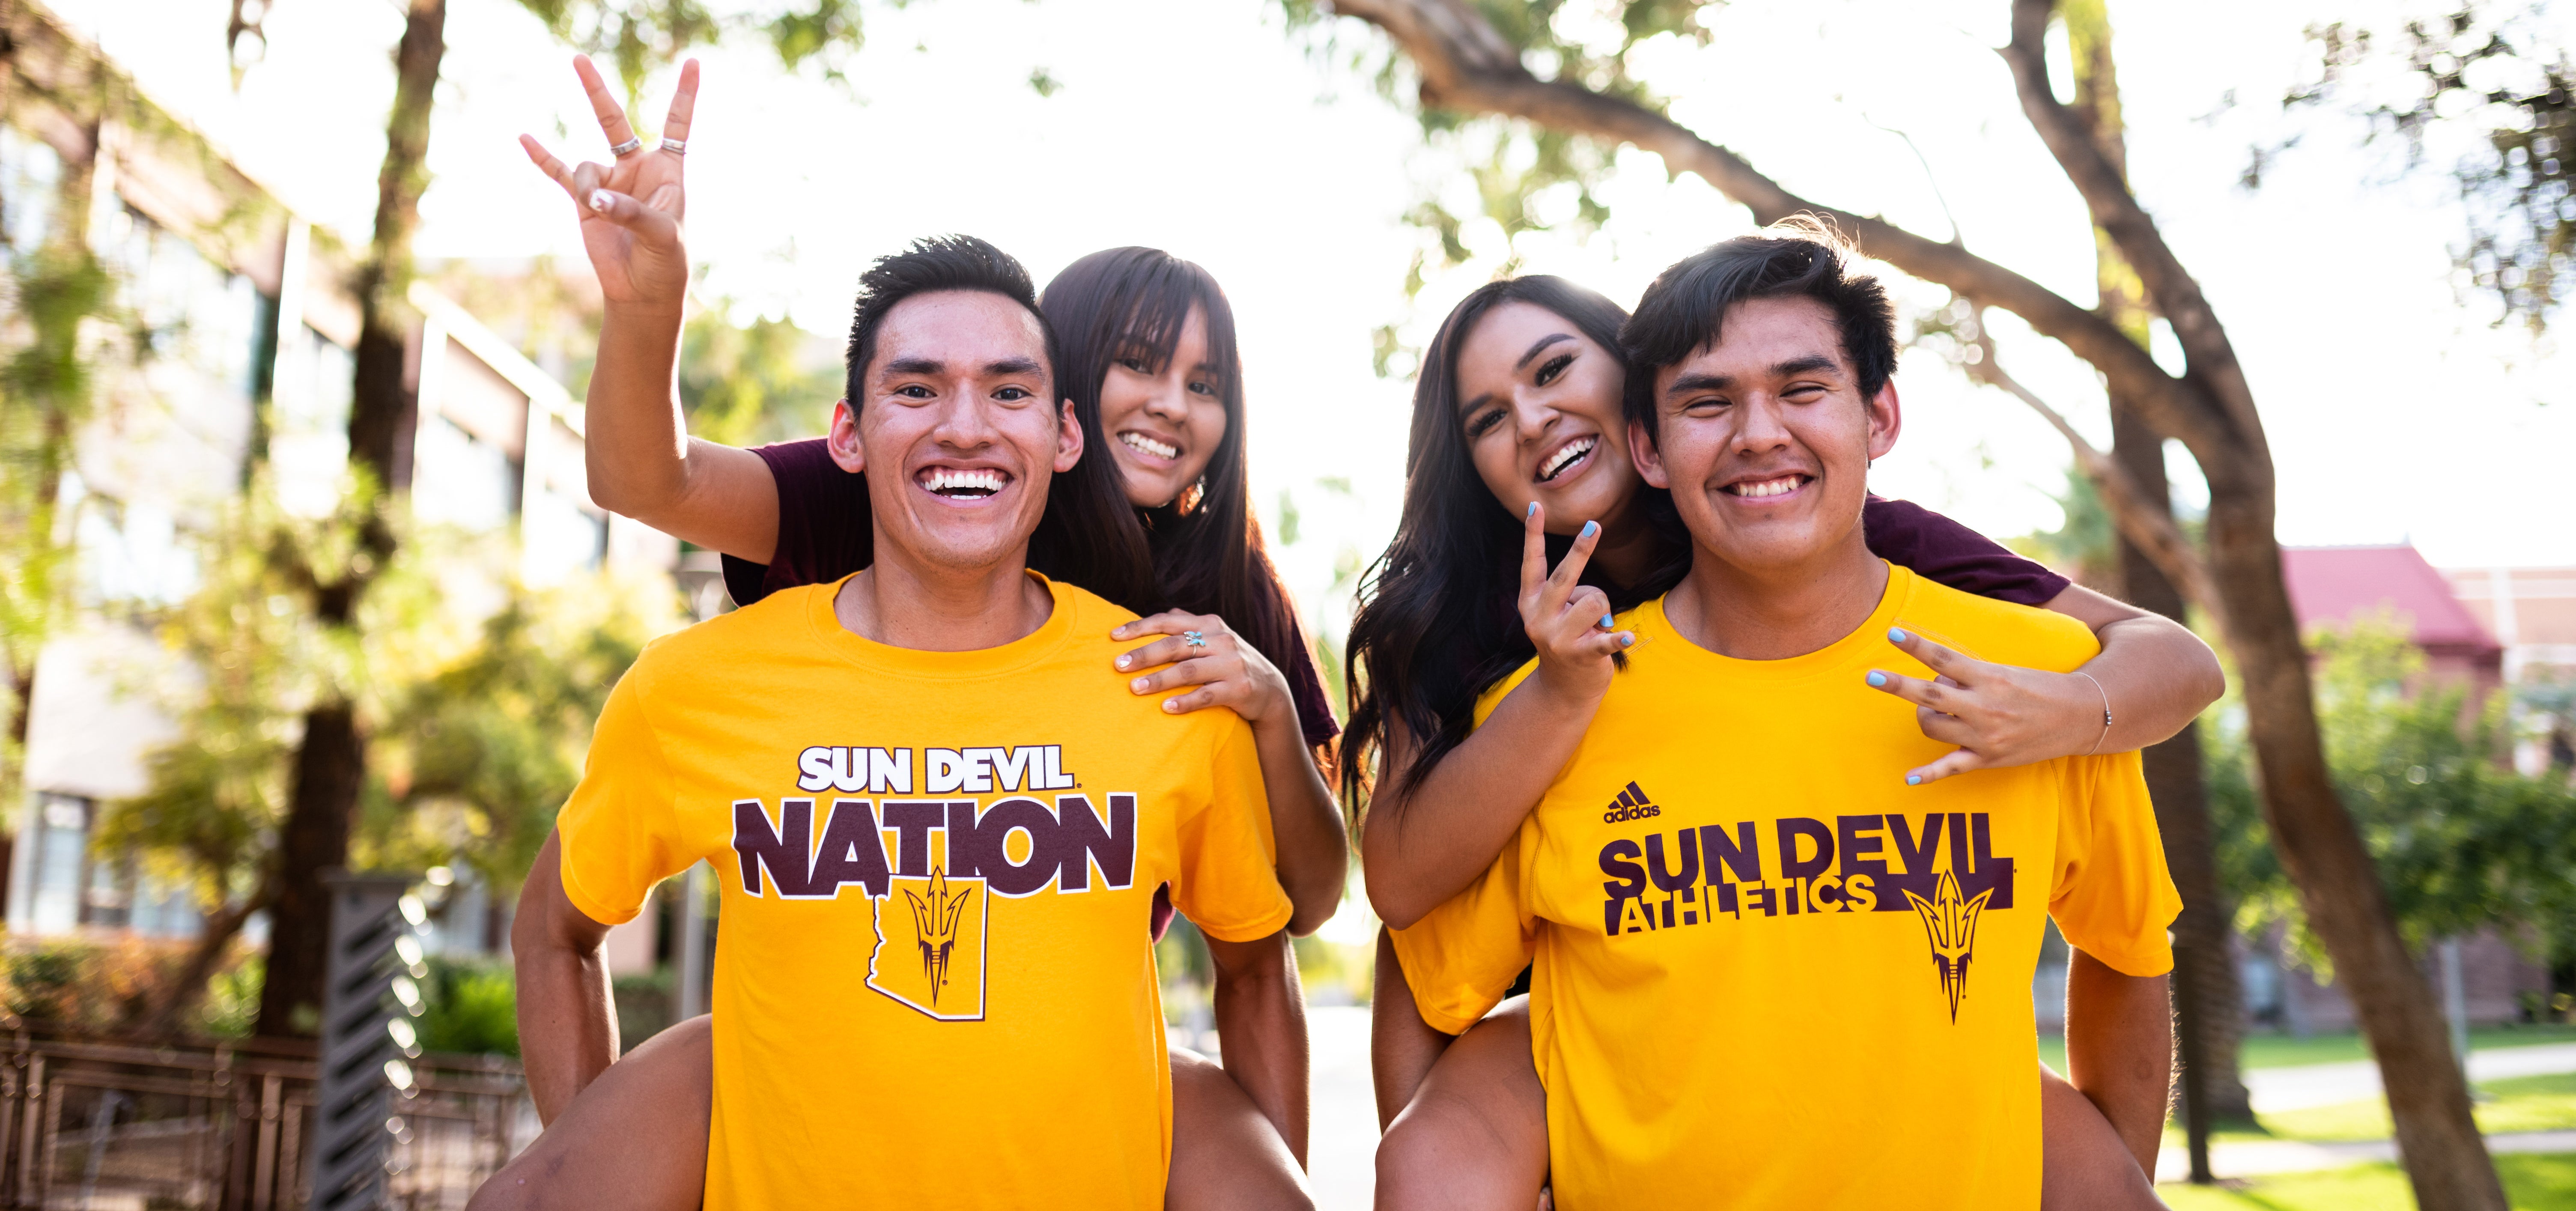 Auto Admit header image - smiling students in sunny outdoors, wearing Sun Devil t-shirts and making pitchfork hand sign